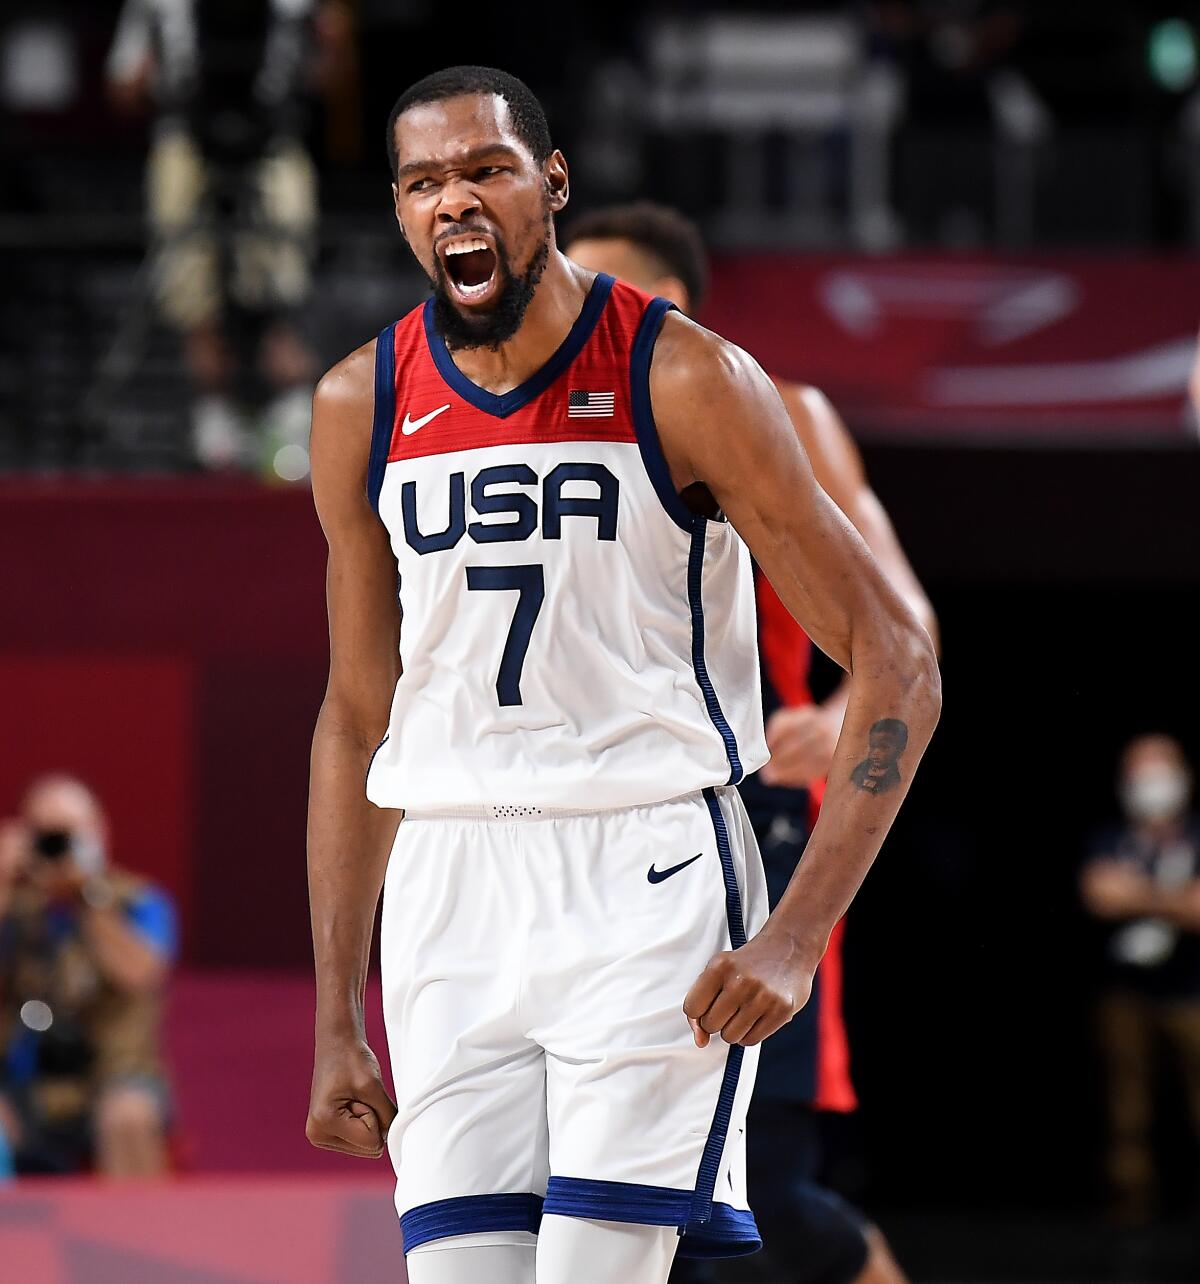 Kevin Durant celebrates after hitting a three-pointer for the U.S. against France.